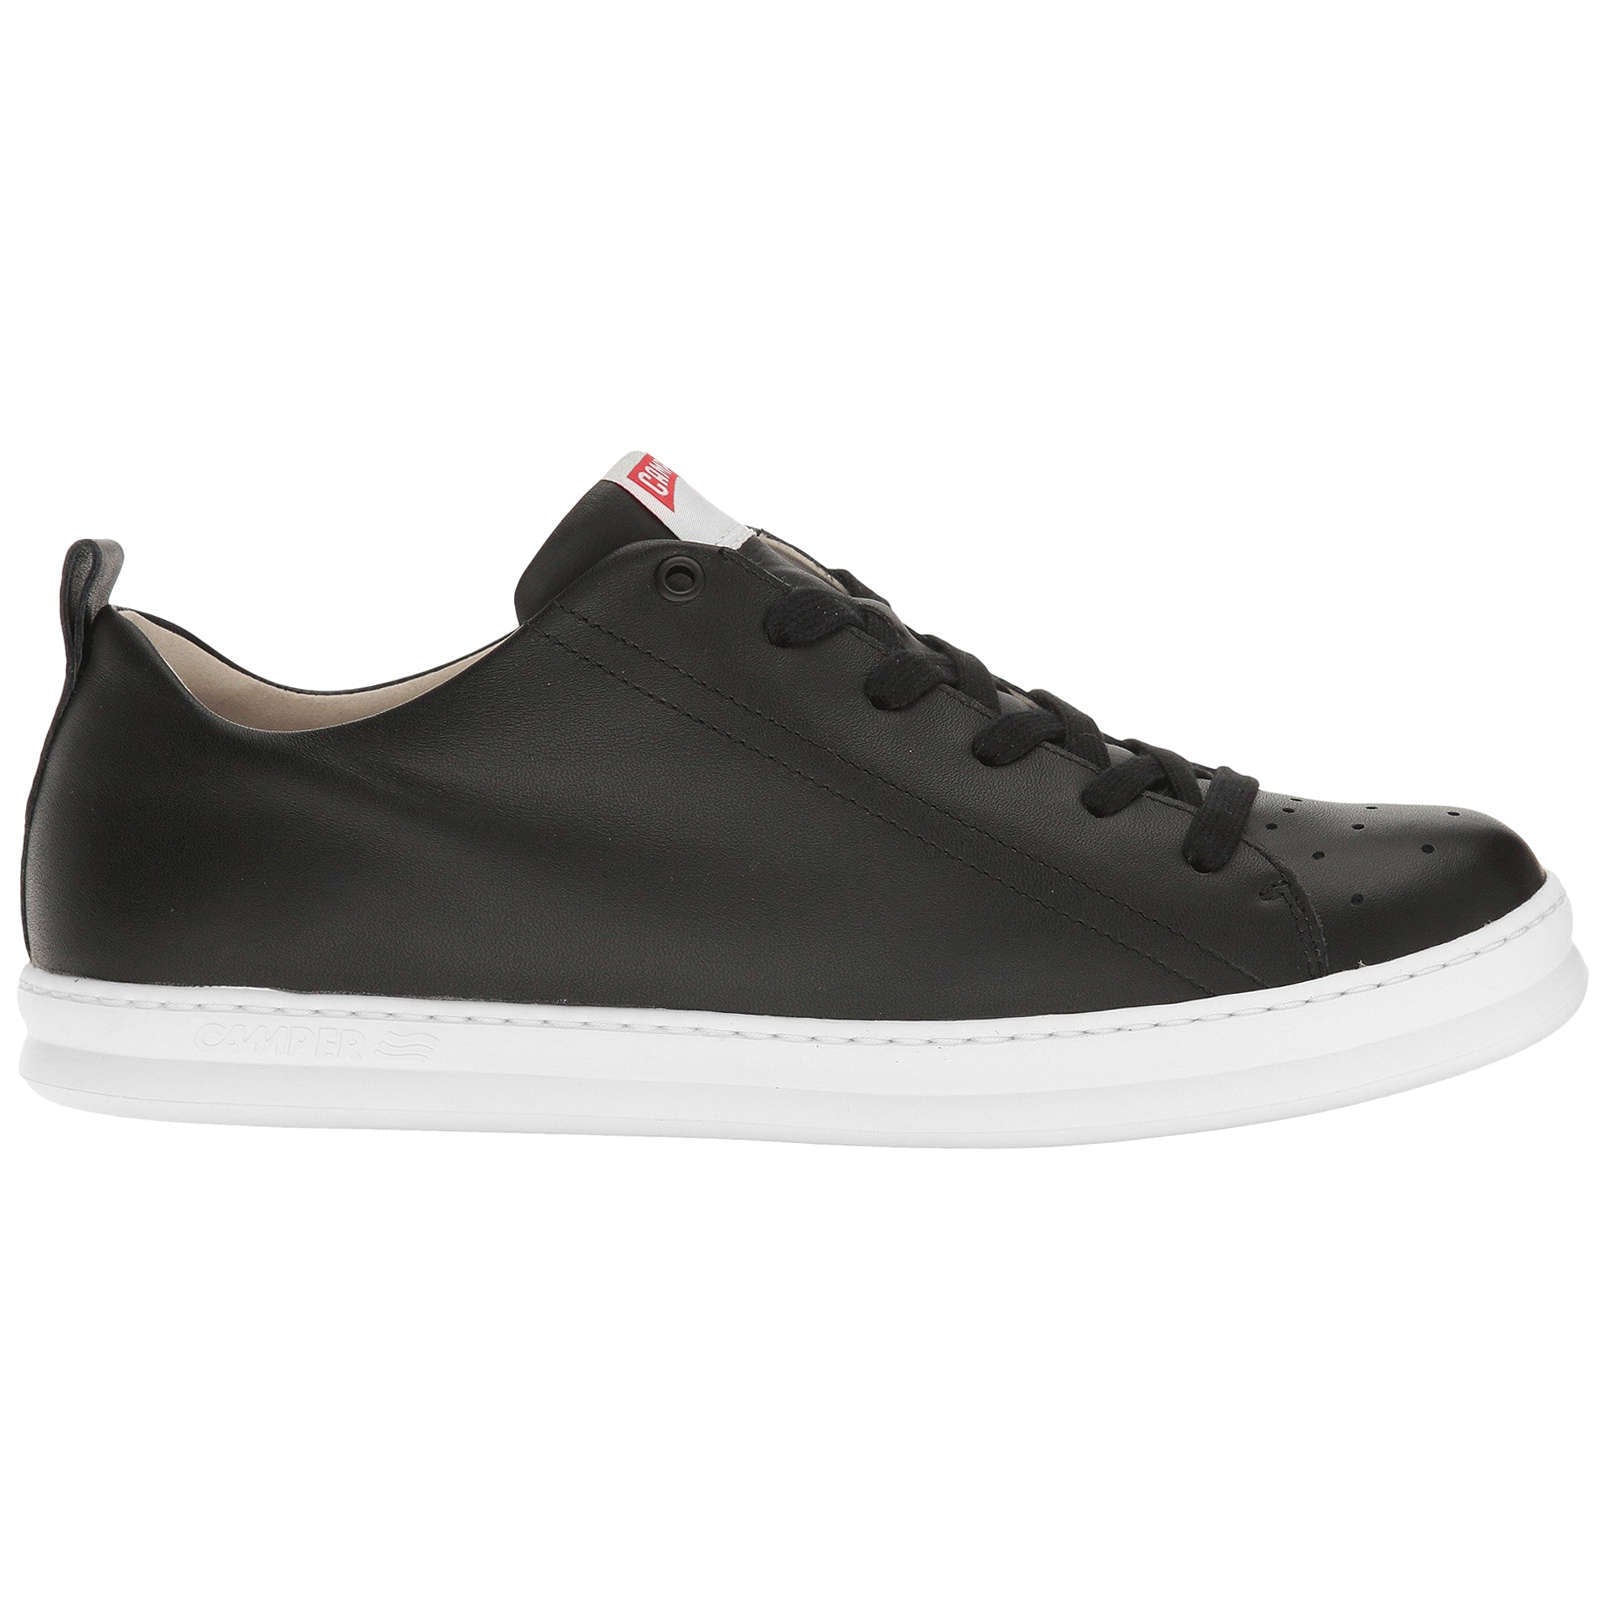 Camper Runner Calfskin Leather Men's Low-Top Trainers#color_black white